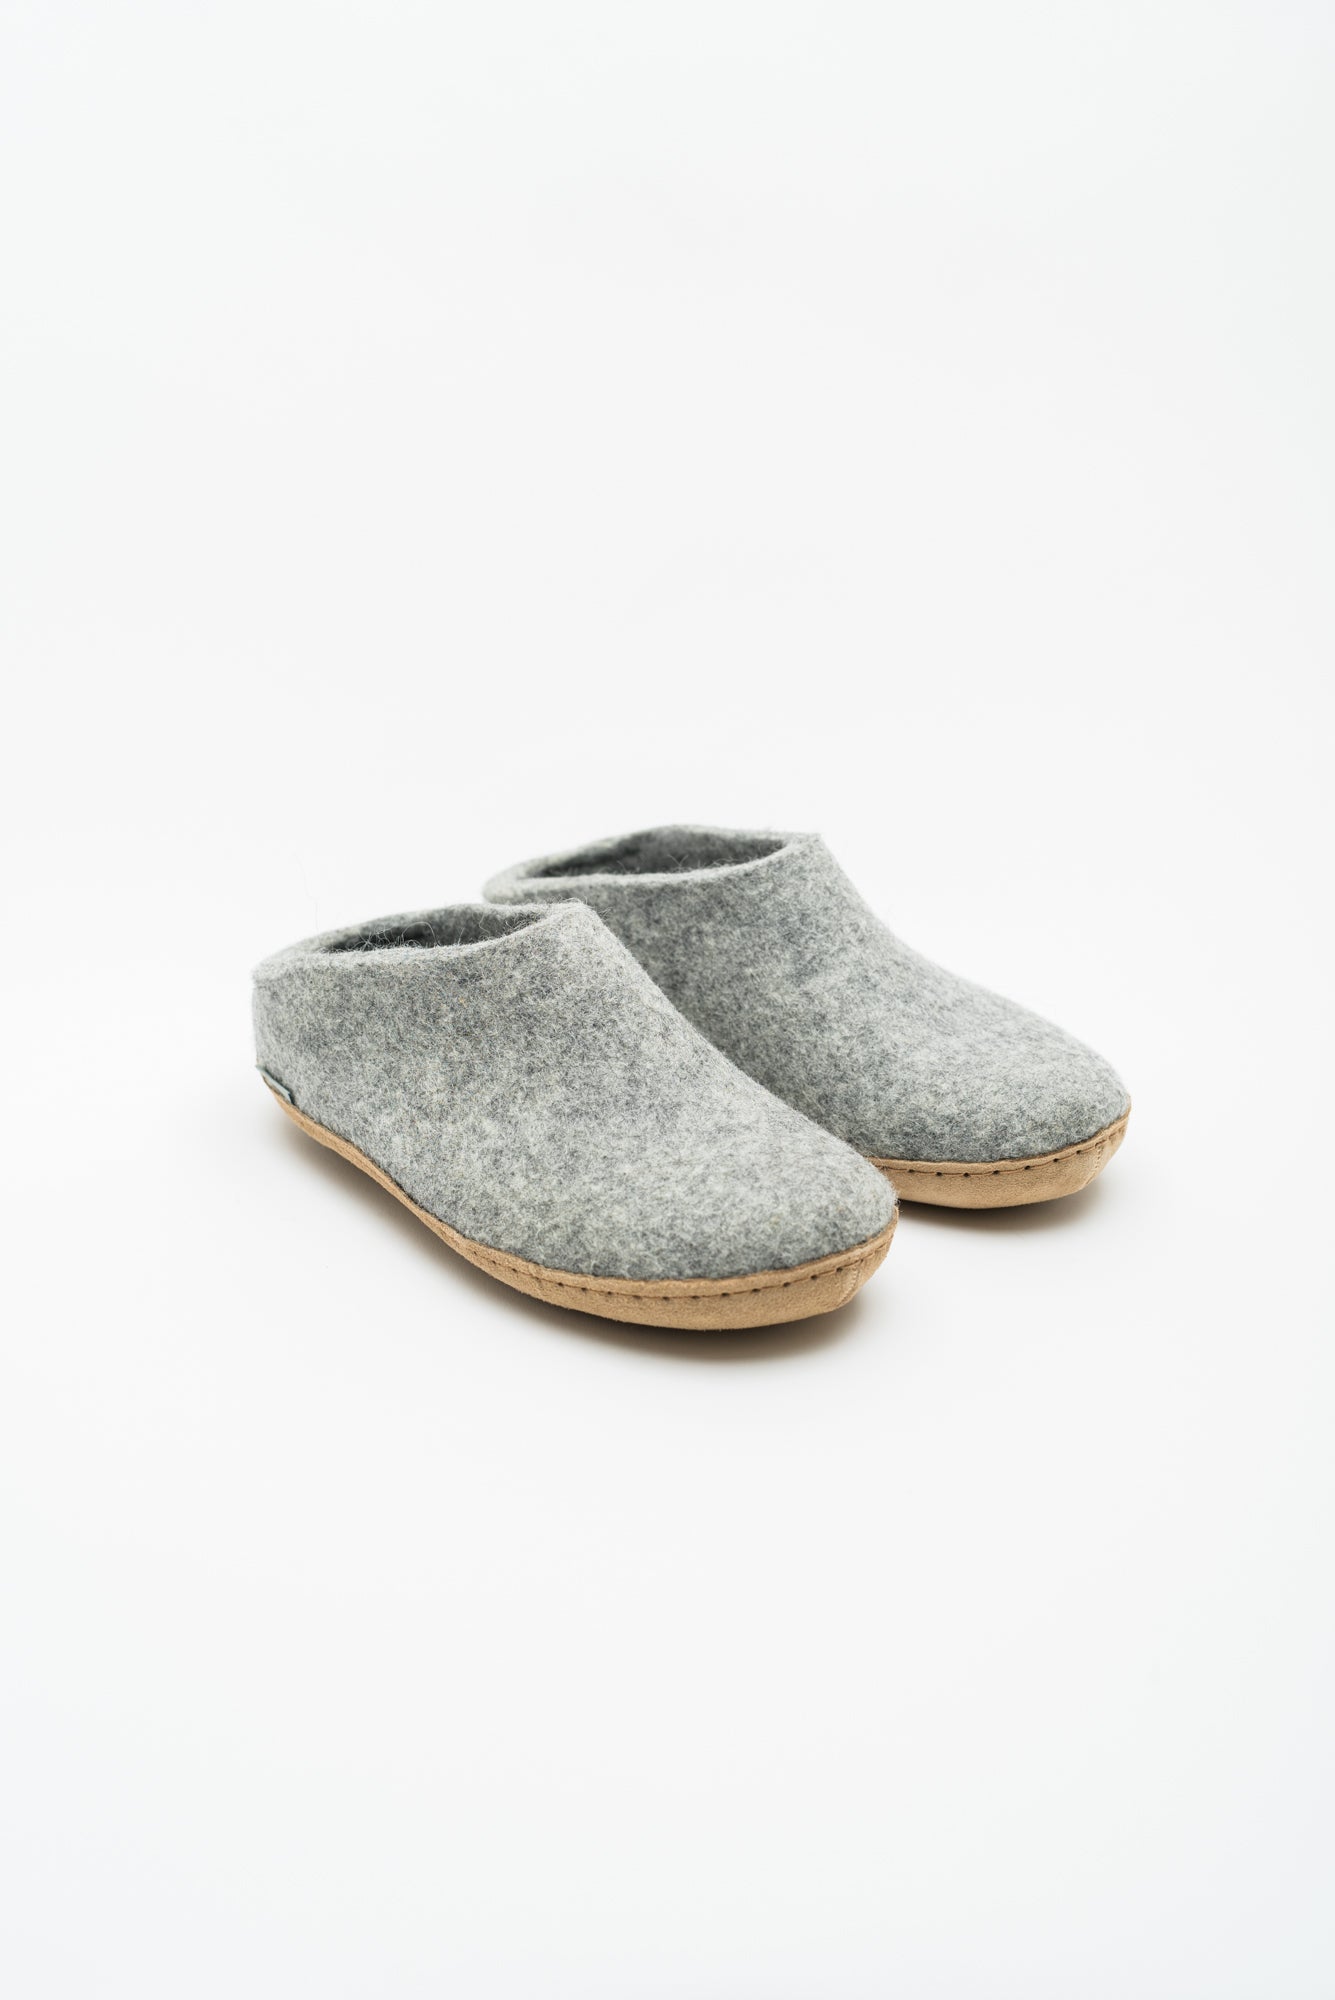 Load image into Gallery viewer, Glerups Open Heel Slipper with Leather Sole - Grey
